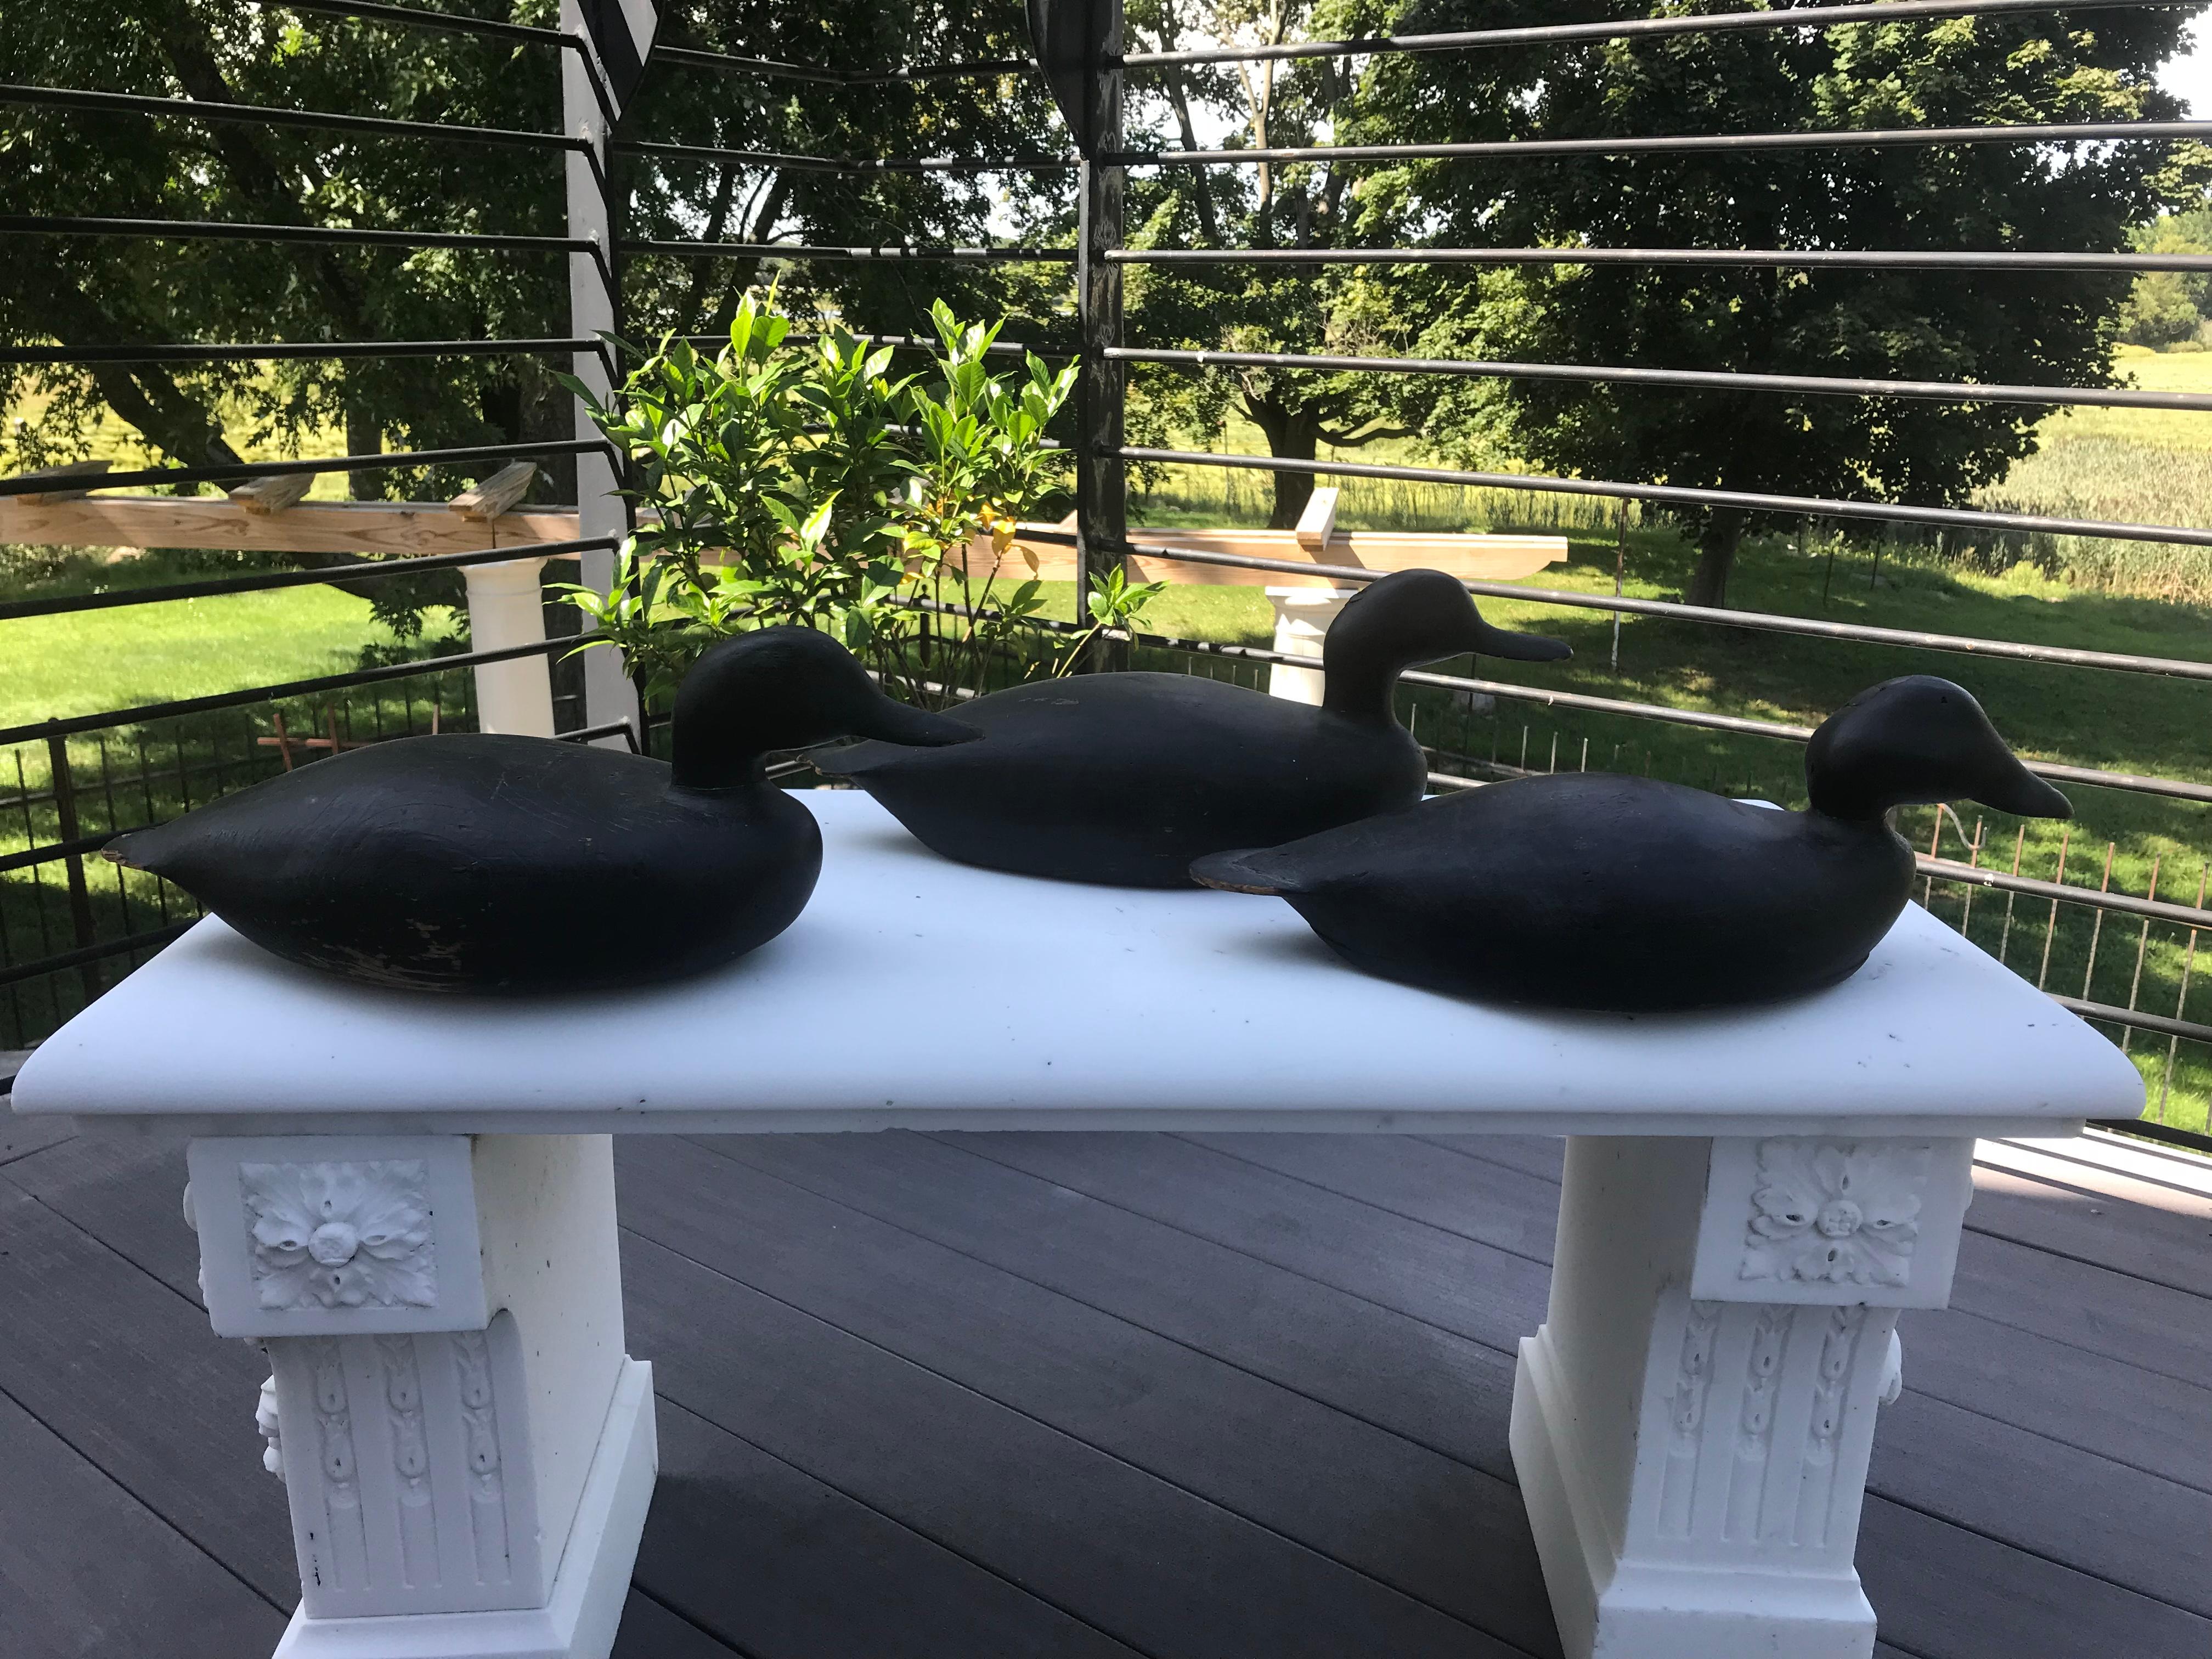 Three Martha's Vineyard black duck decoys attributed to Ben Smith

- Original paint on all
- Minor chipping from Use
- circa 1900
- Two are hollow carved, one is solid body.
    